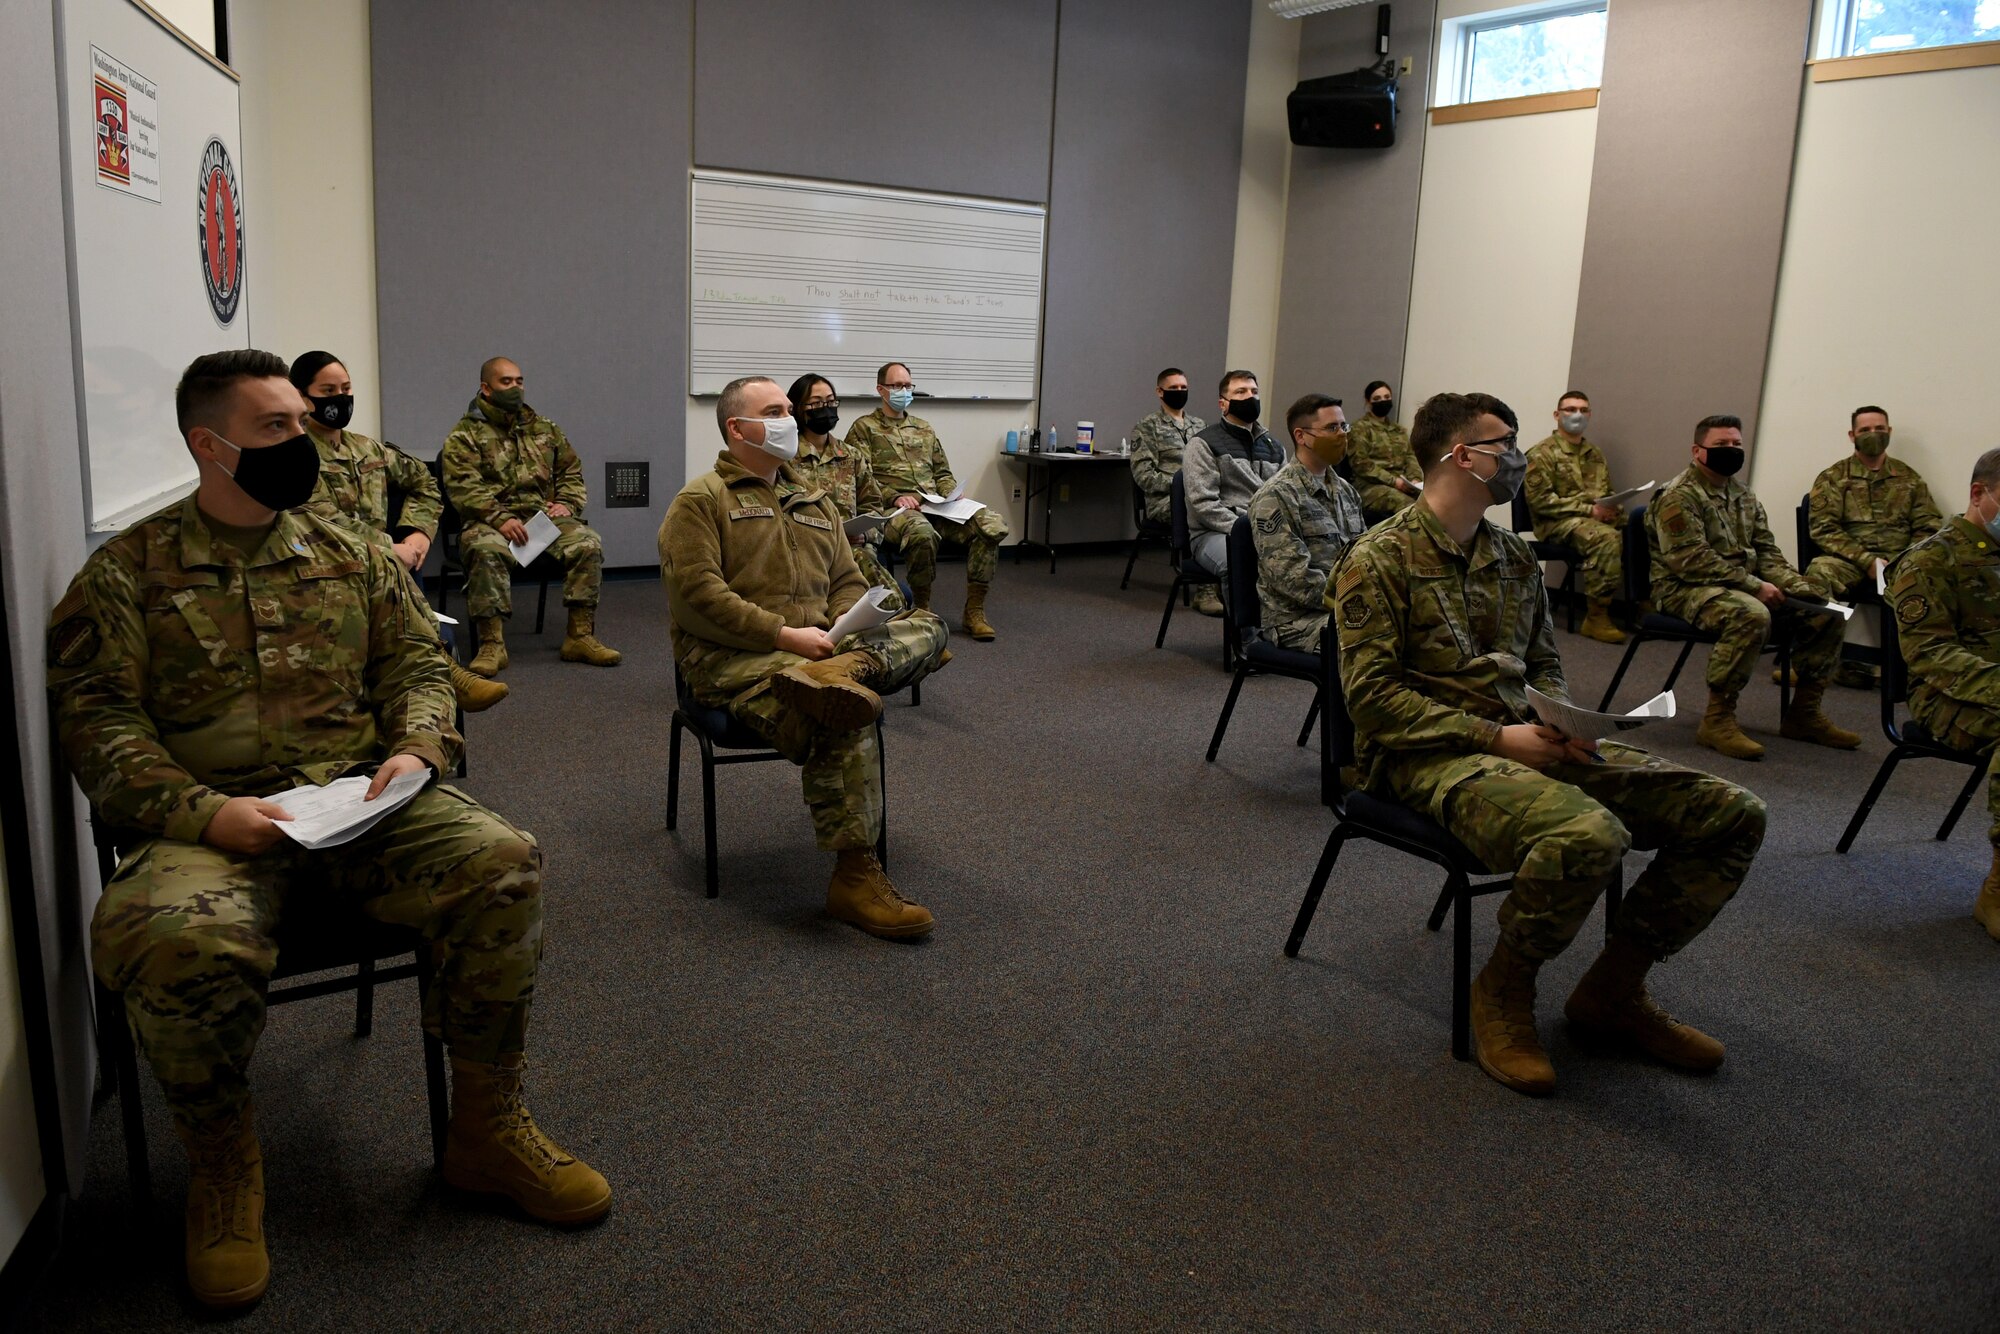 Airmen receive a briefing on the COVID-19 vaccine